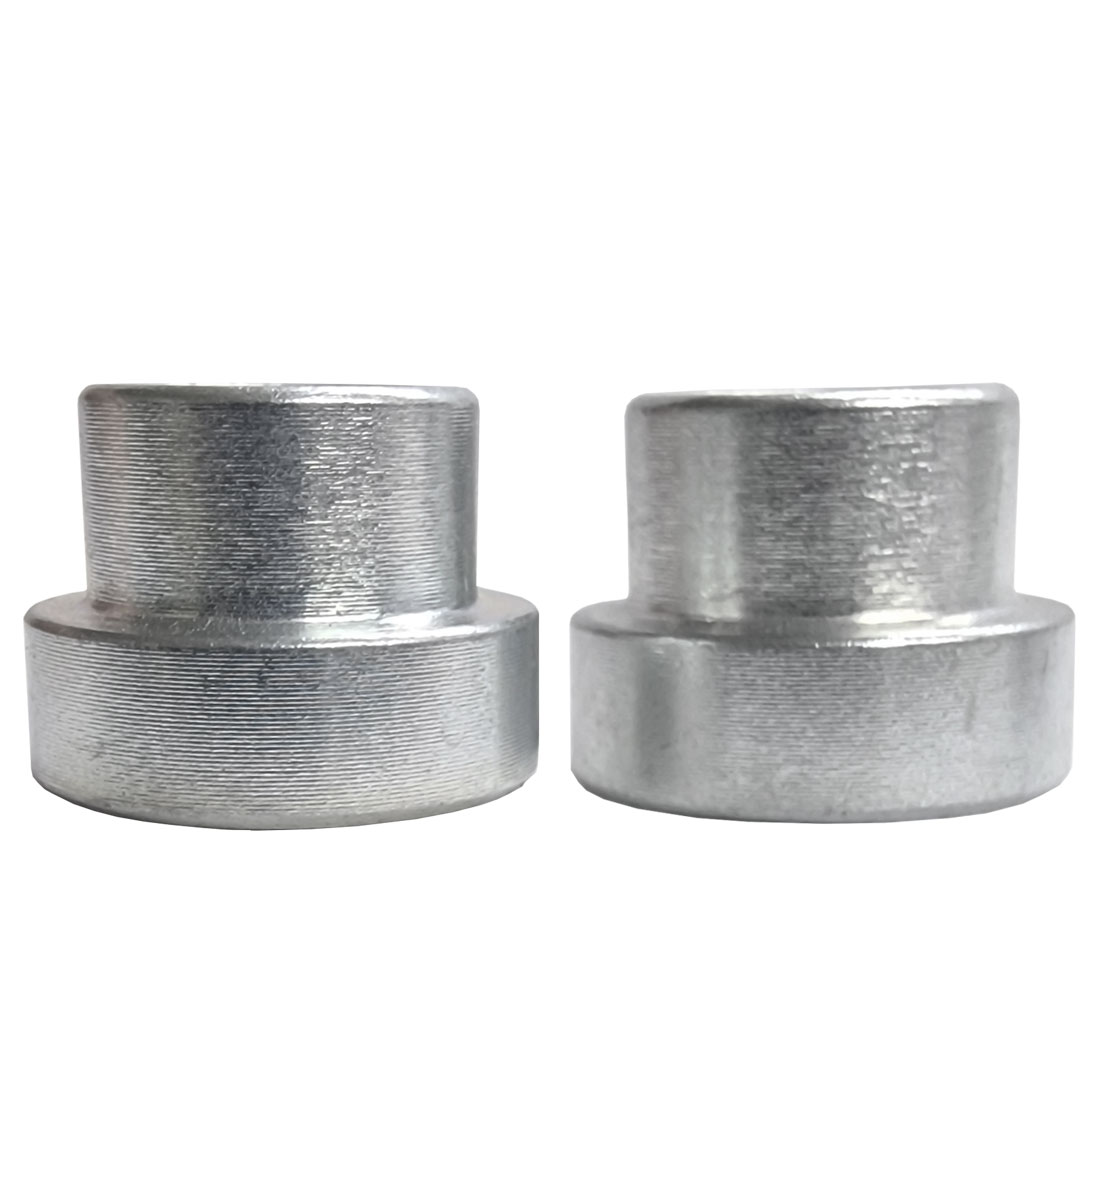 1/2" to 3/8" Top Hat Reducers - 2x Pairs